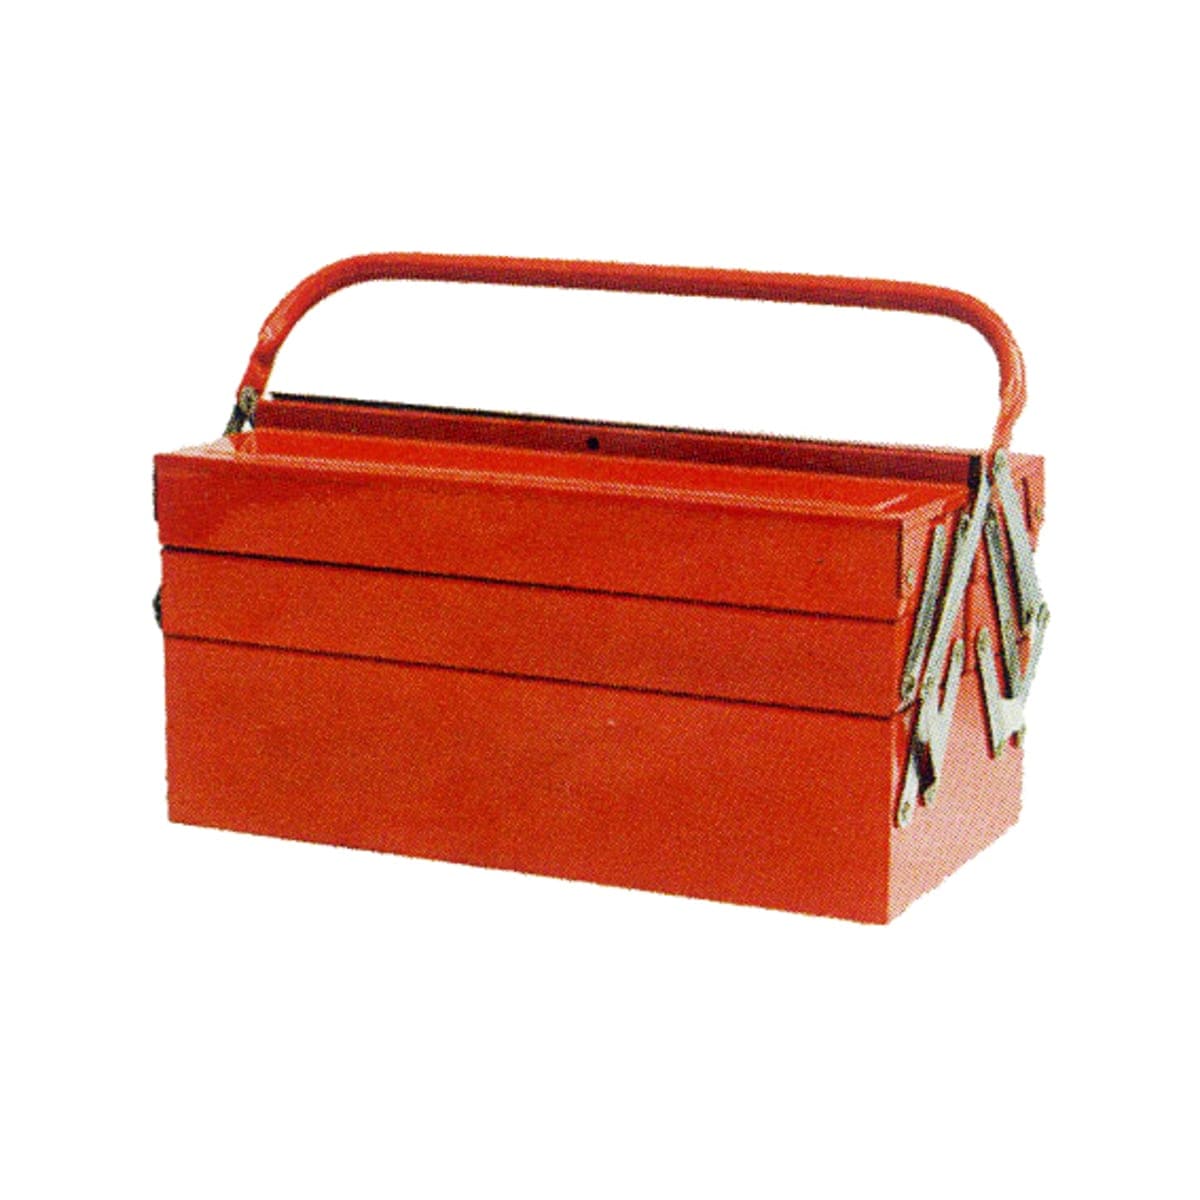 METAL TOOLBOX WITH 5 COMPARTMENTS